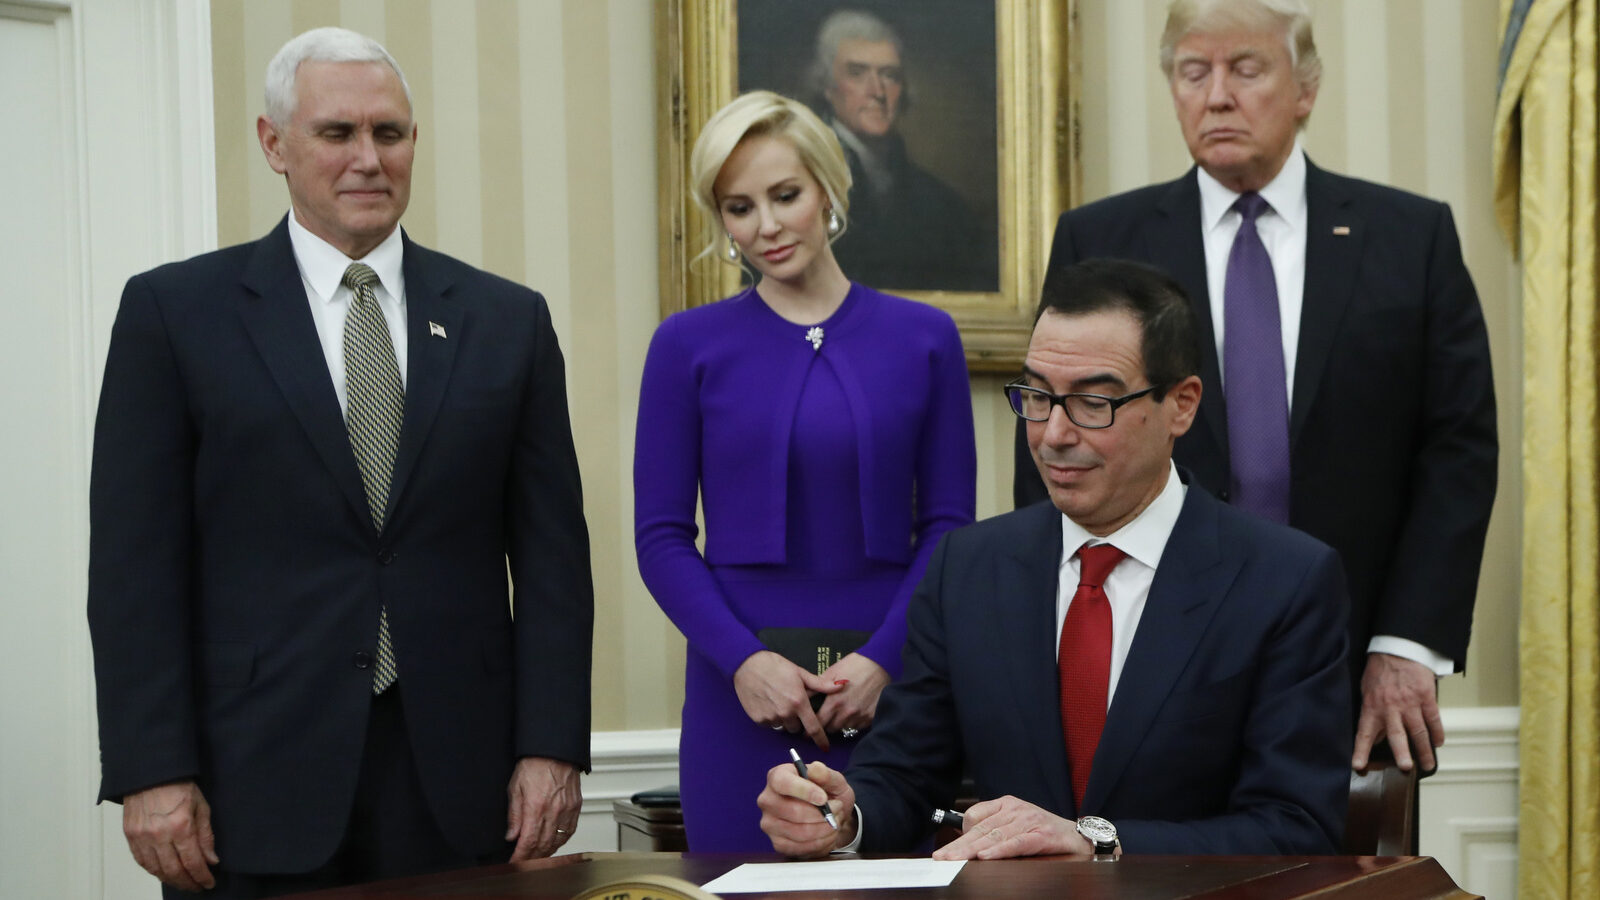 President Donald Trump, right, Vice President Mike Pence, left, witness Treasury Secretary Steven Mnuchin accompanied by his fiancée Louise Linton sign documents after he was sworn-in by the vice president, Monday, Feb. 13, 2017. (AP/Manuel Balce Ceneta)